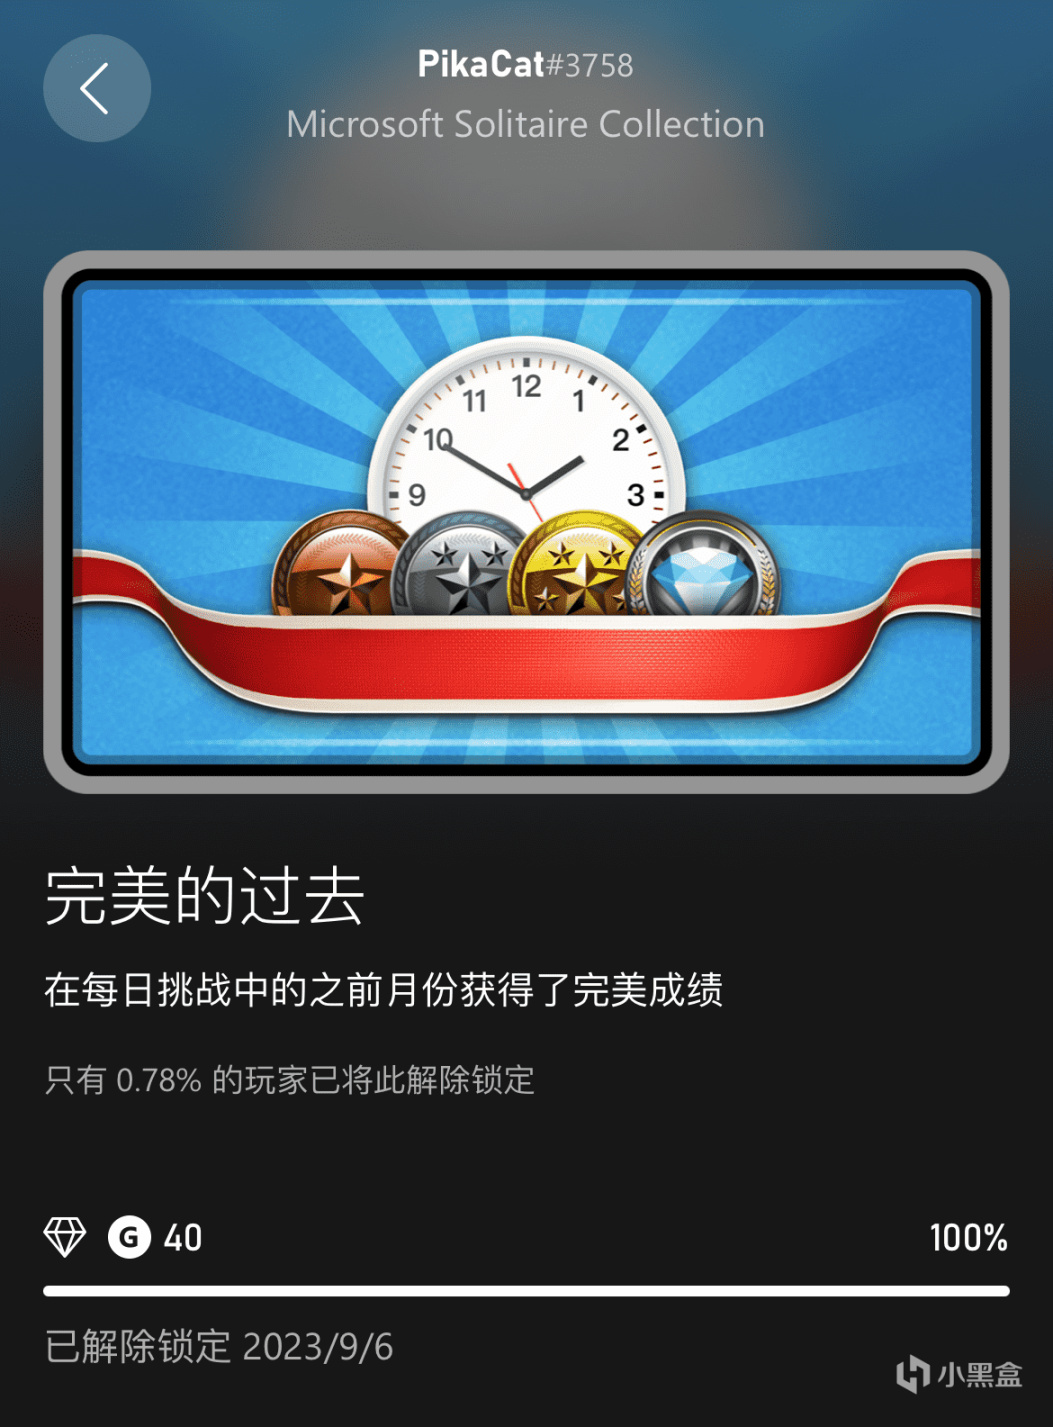 【Microsoft Solitaire】Microsoft Solotaire Collection 微軟紙牌合集遊戲體驗-第4張